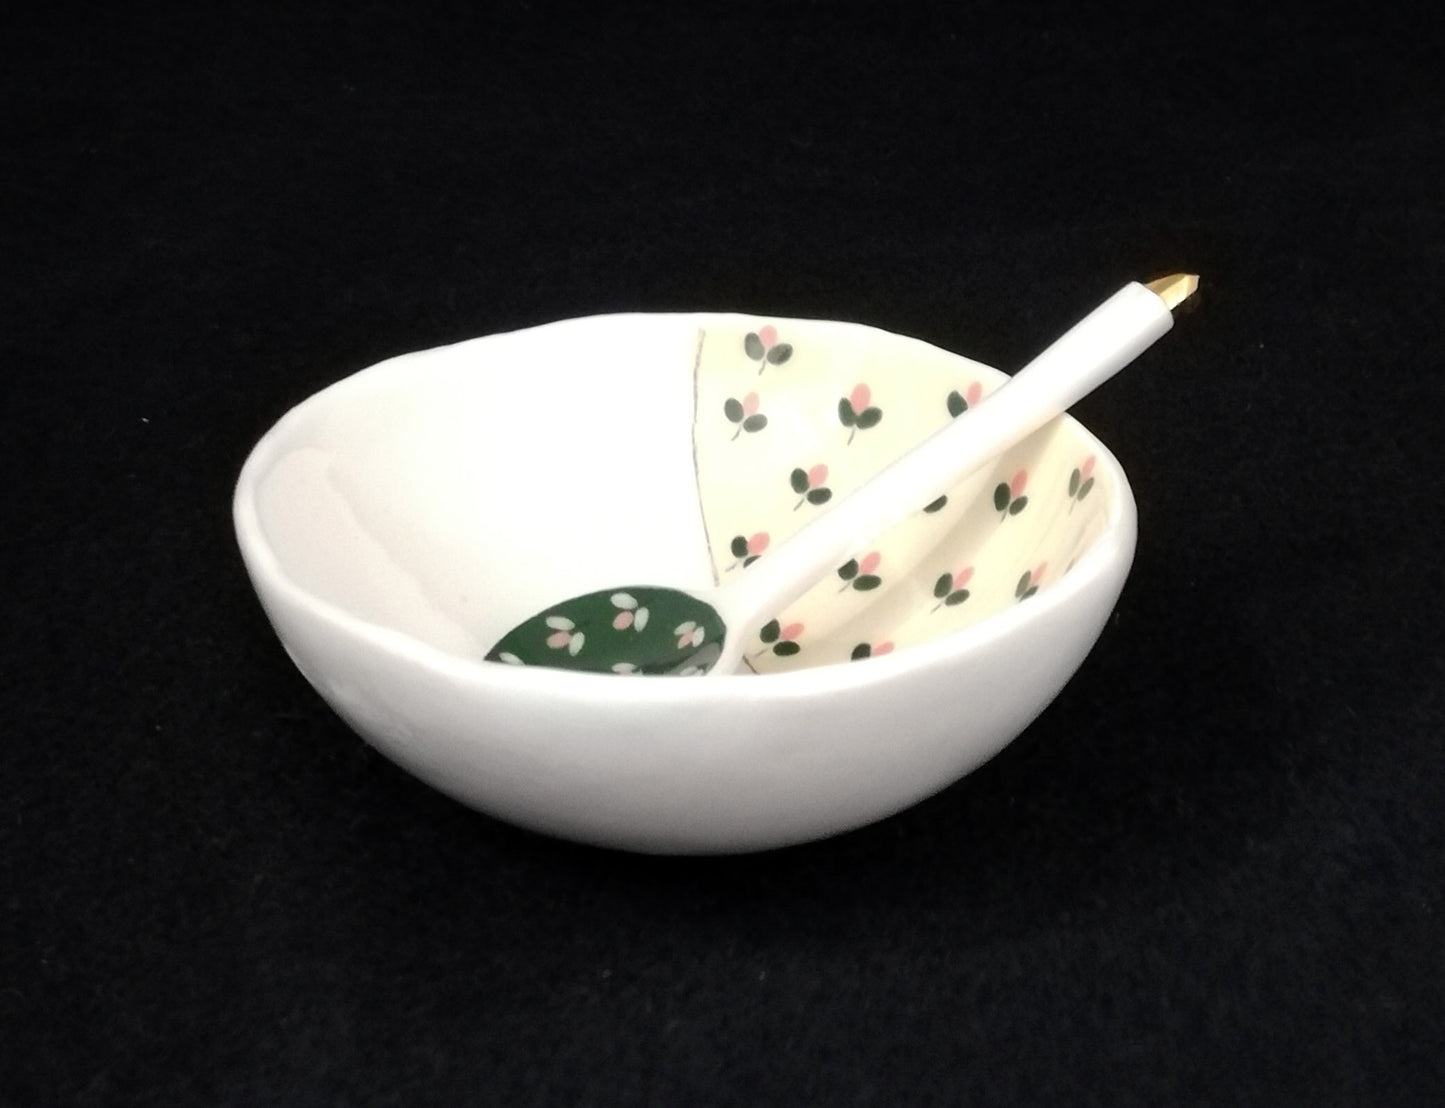 Frances-Spice-Small-Patterned-Bowl-and-Spoon Set